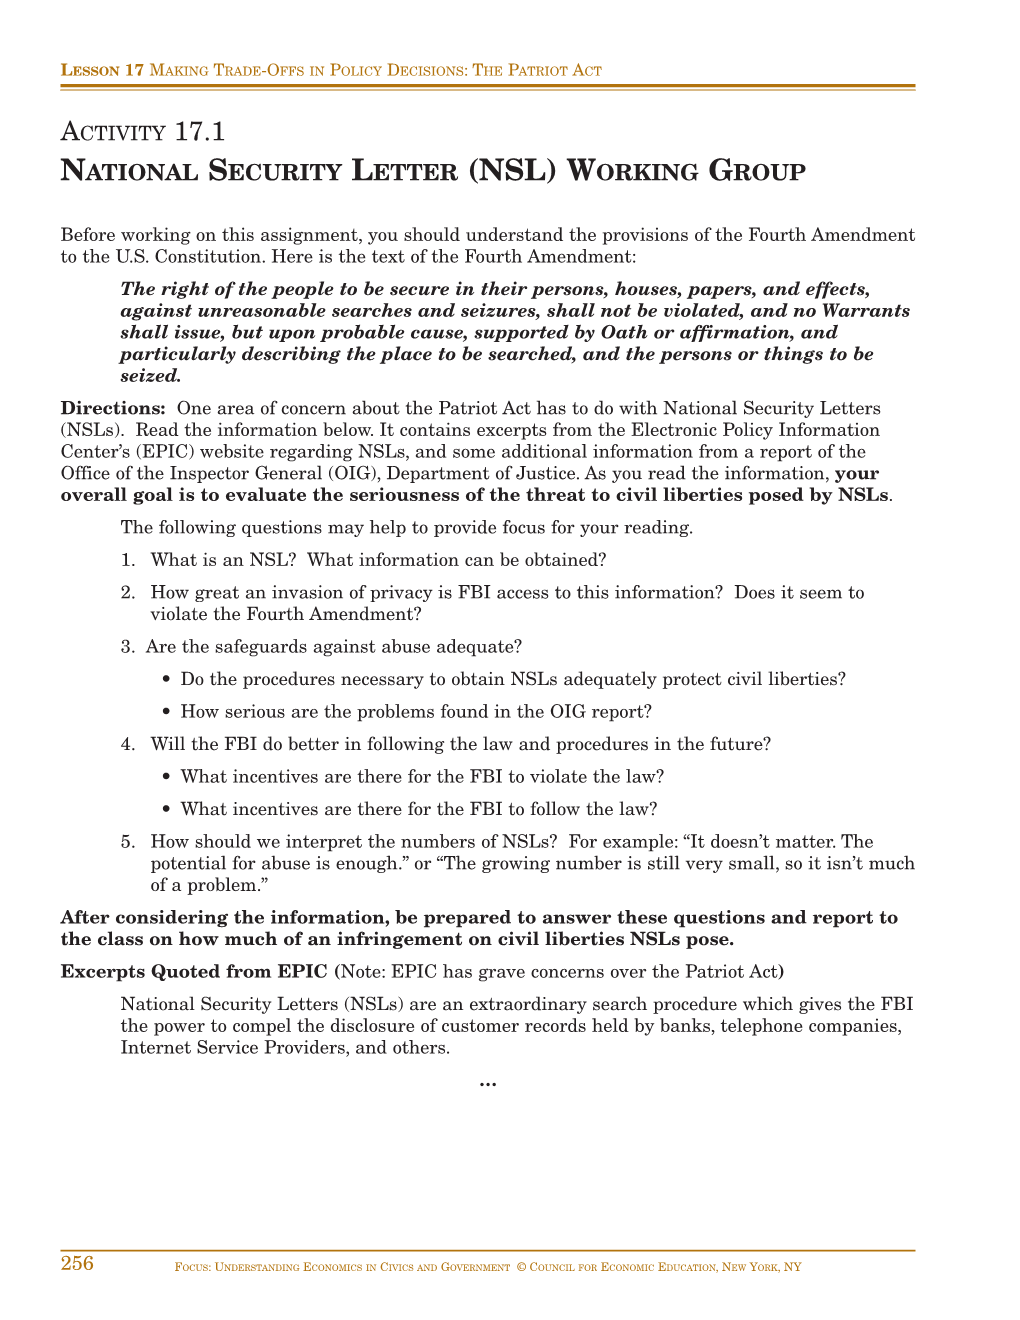 National Security Letter (Nsl) Working Group